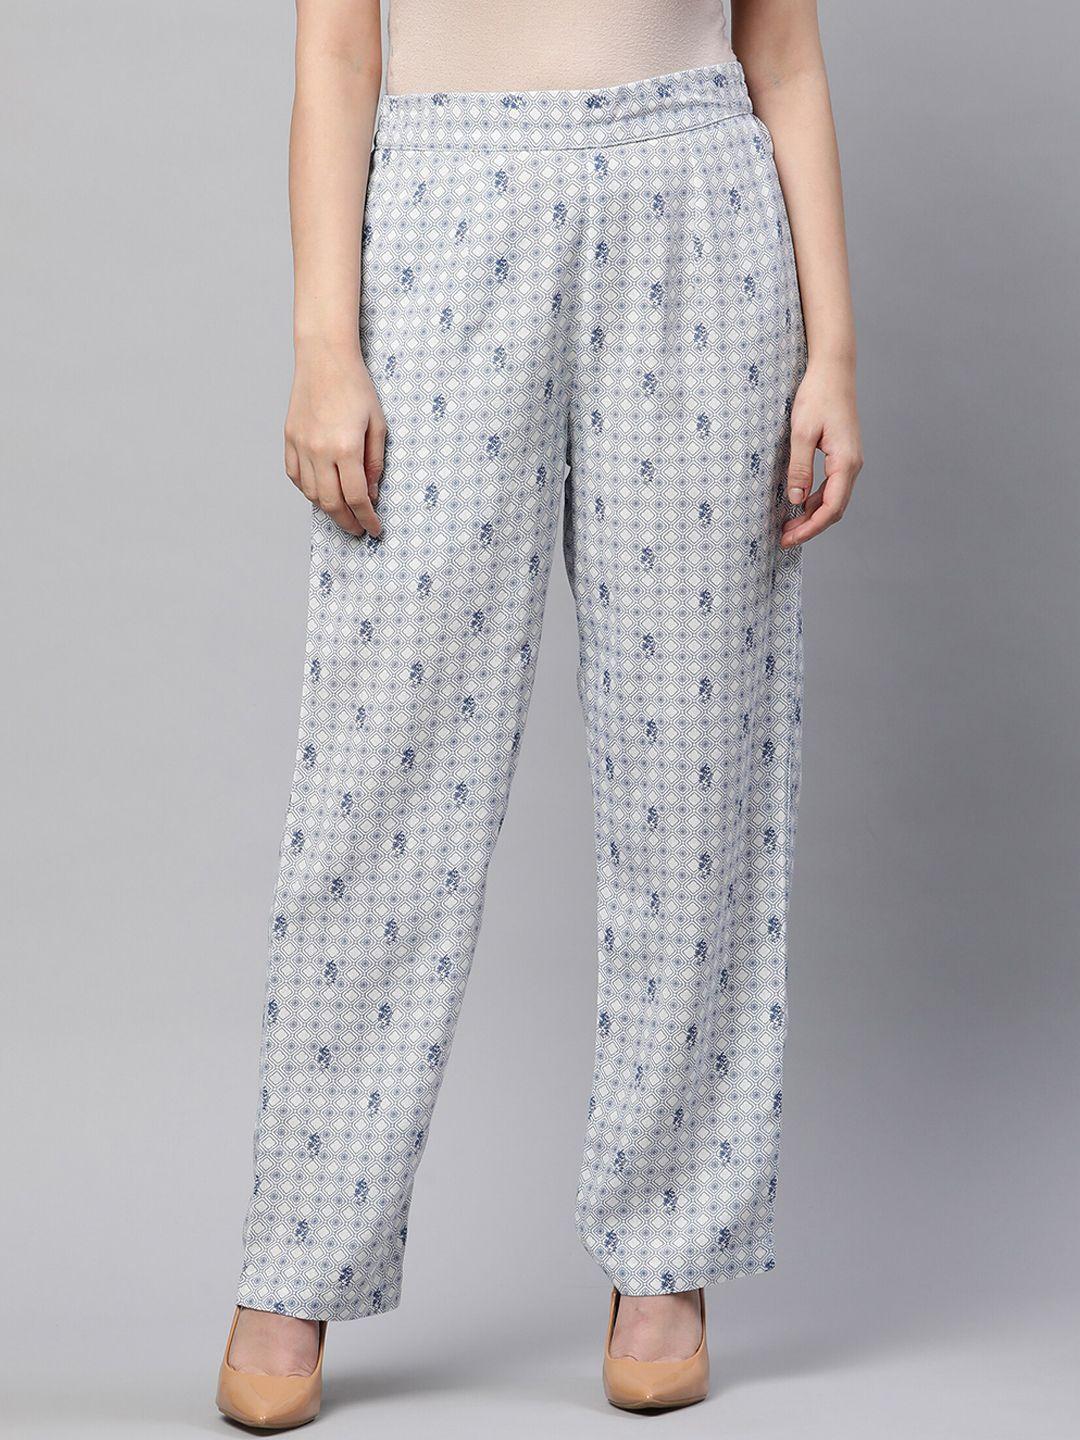 linen club woman women mid rise printed trousers